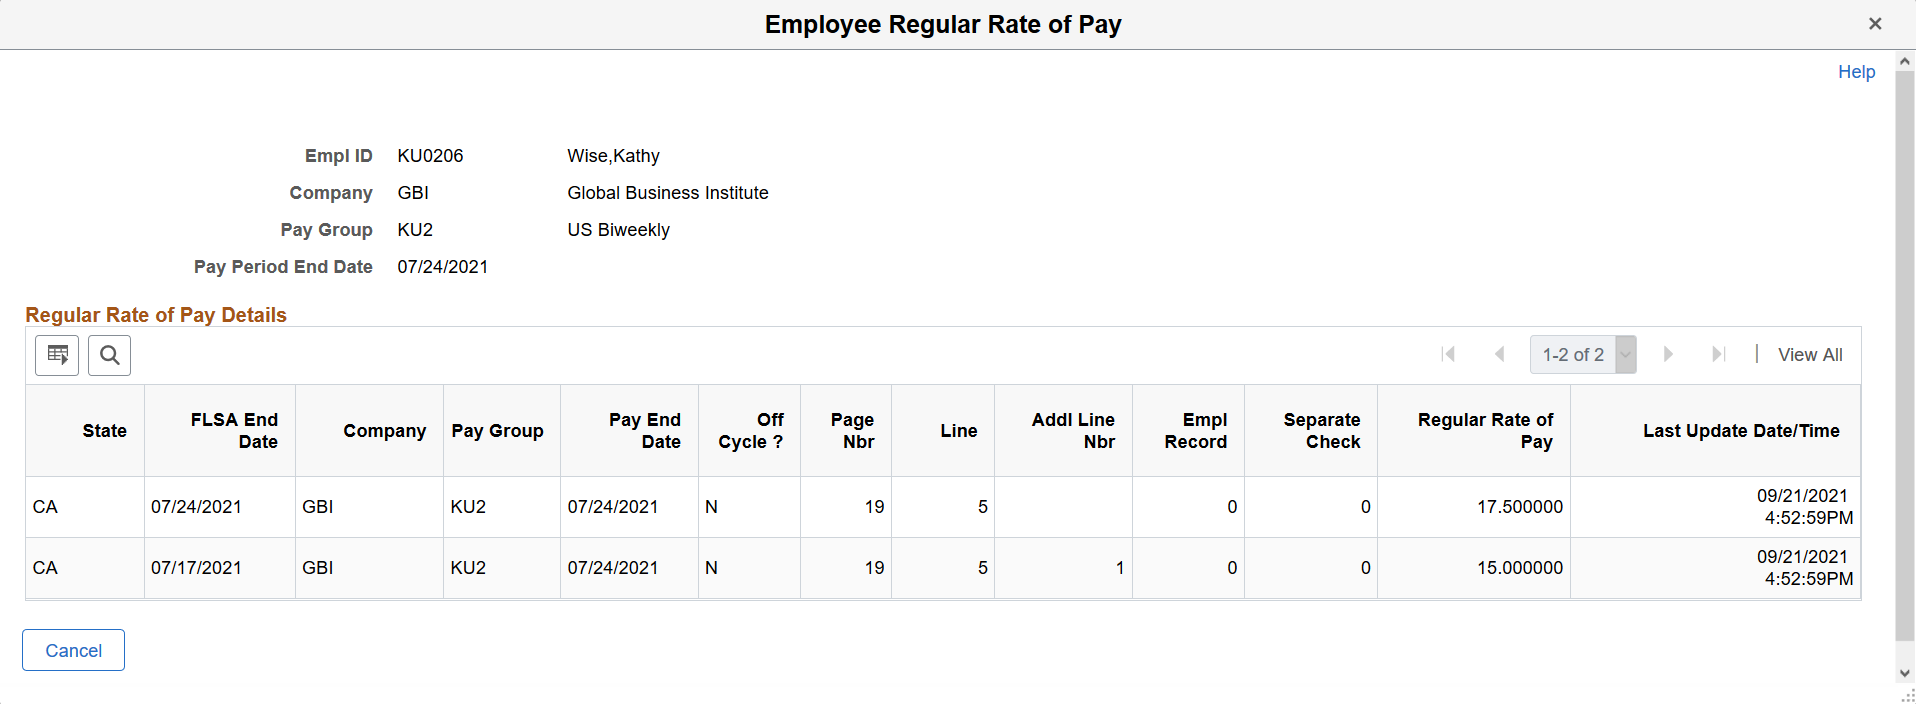 Calculated regular rate of pay for example 3